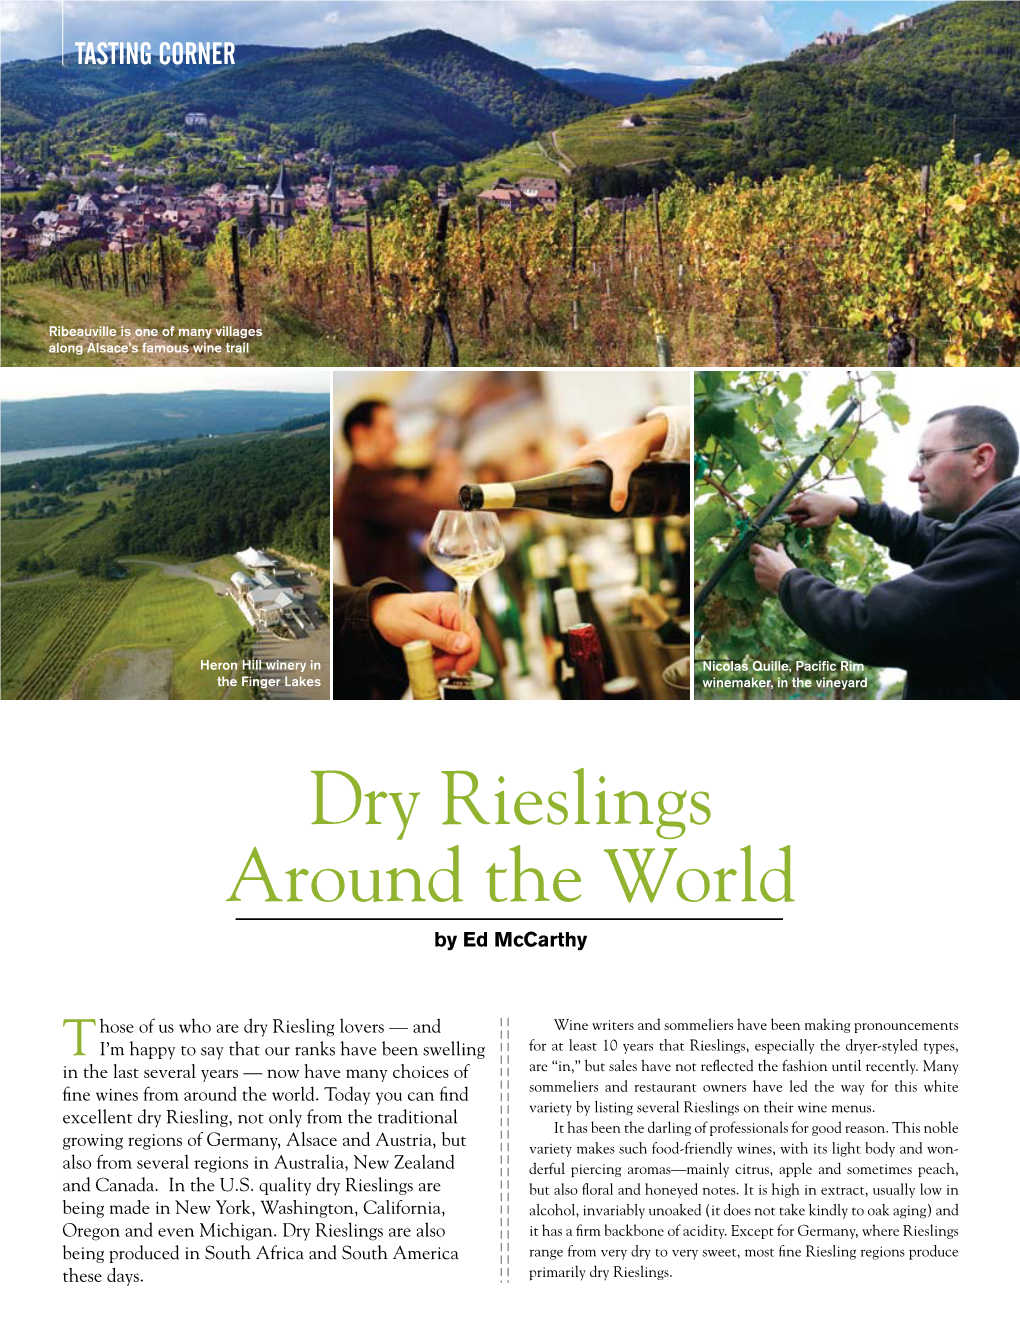 Dry Rieslings Around the World by Ed Mccarthy